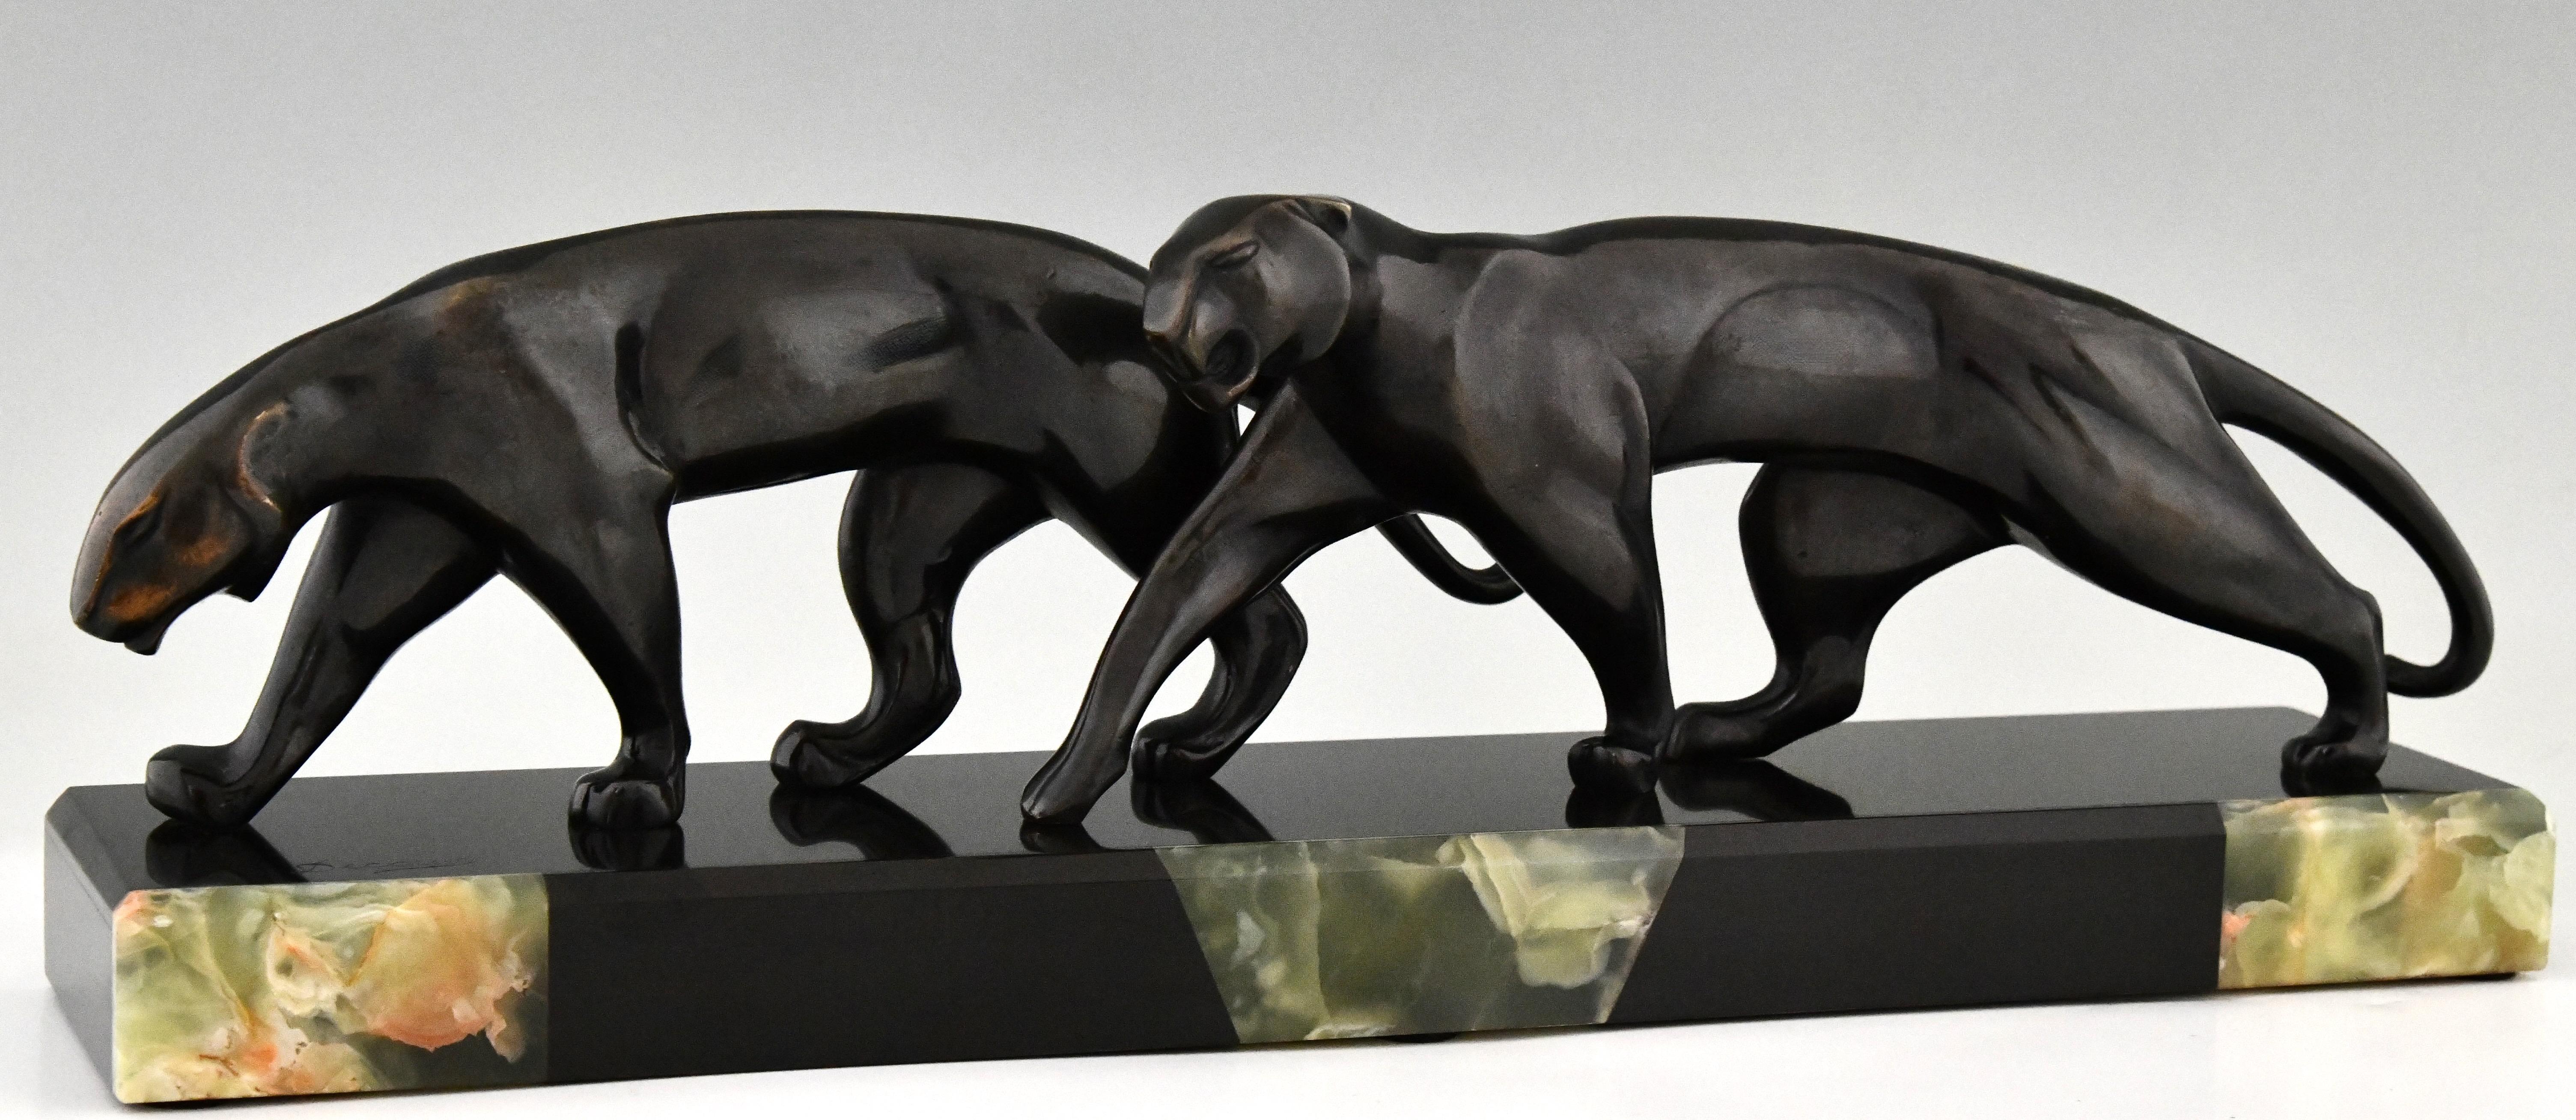 French Art Deco bronze sculpture two panthers signed by Michel Decoux 1920 For Sale